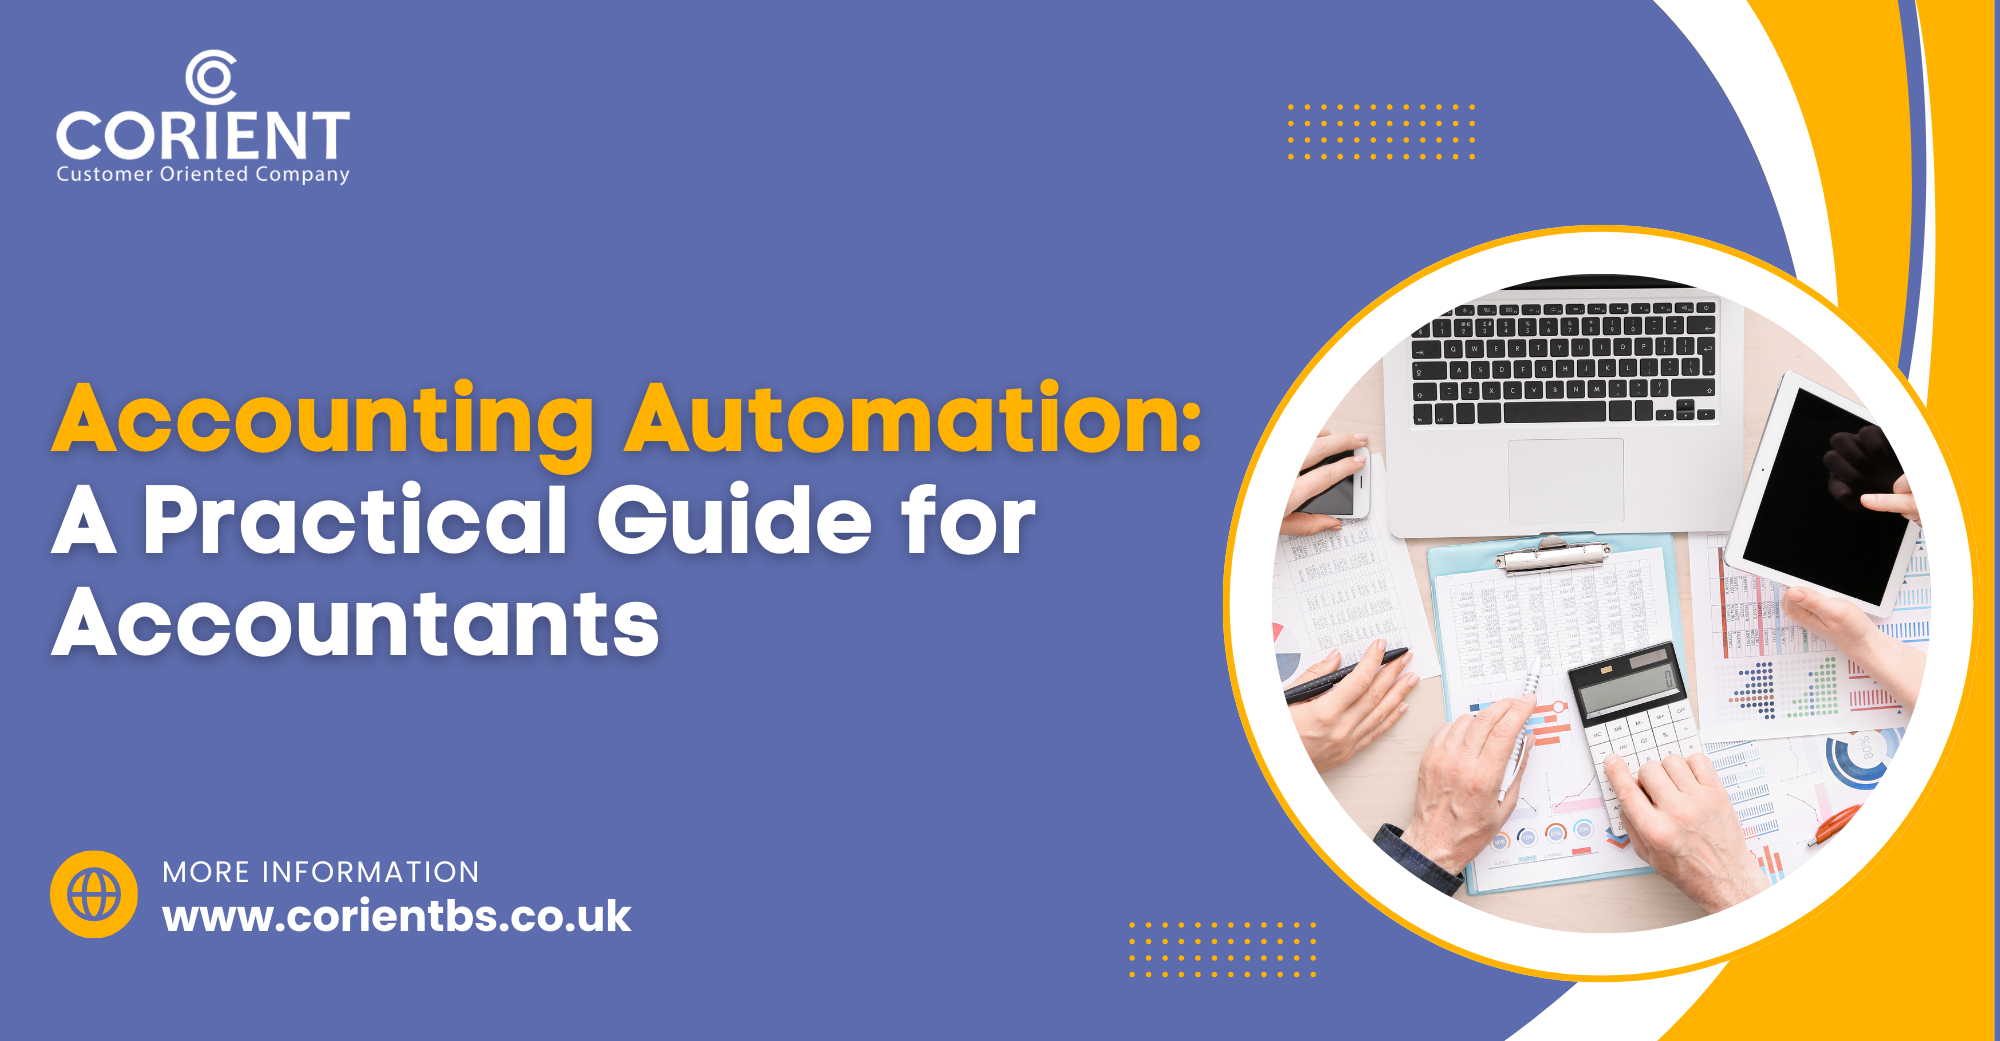 Accounting Automation: A Practical Guide for Accountants